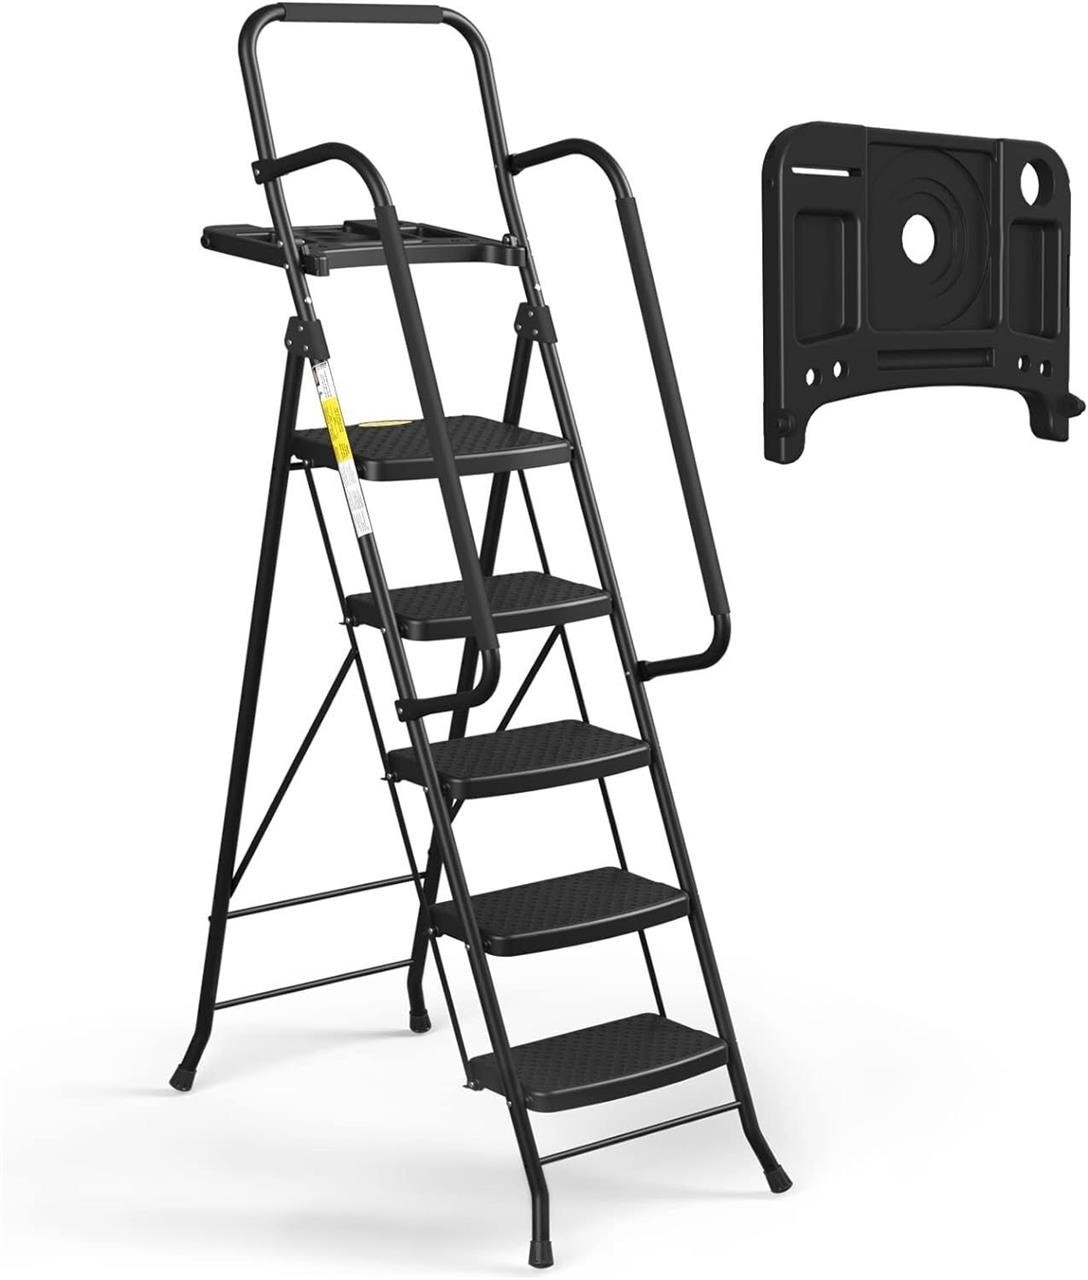 5 Step Ladder with Handrails